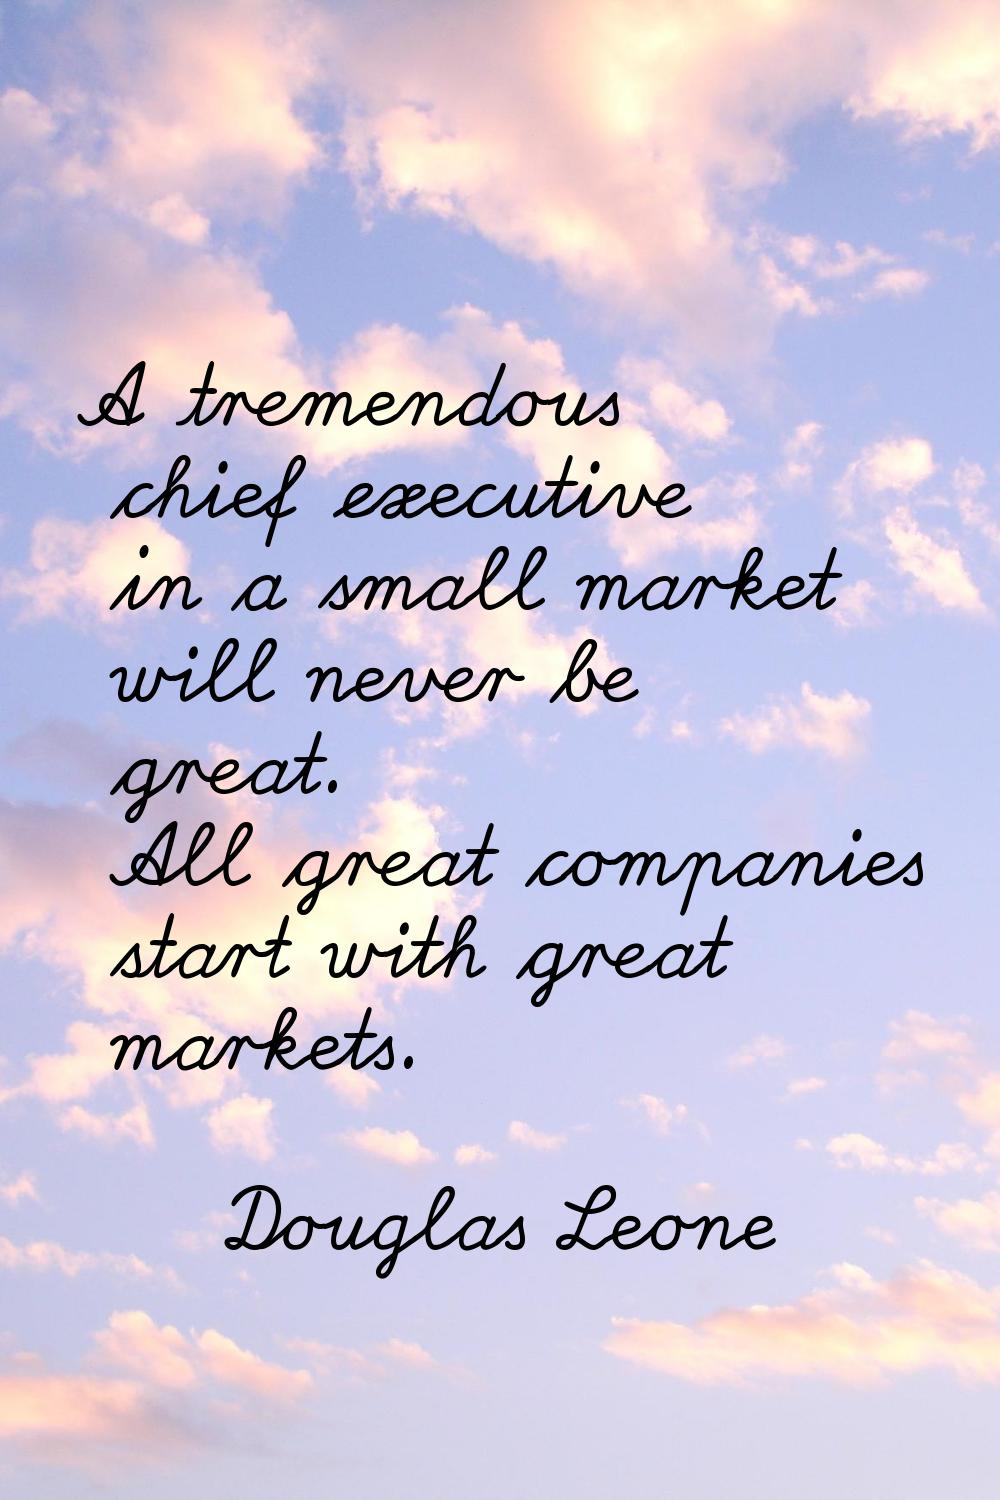 A tremendous chief executive in a small market will never be great. All great companies start with 